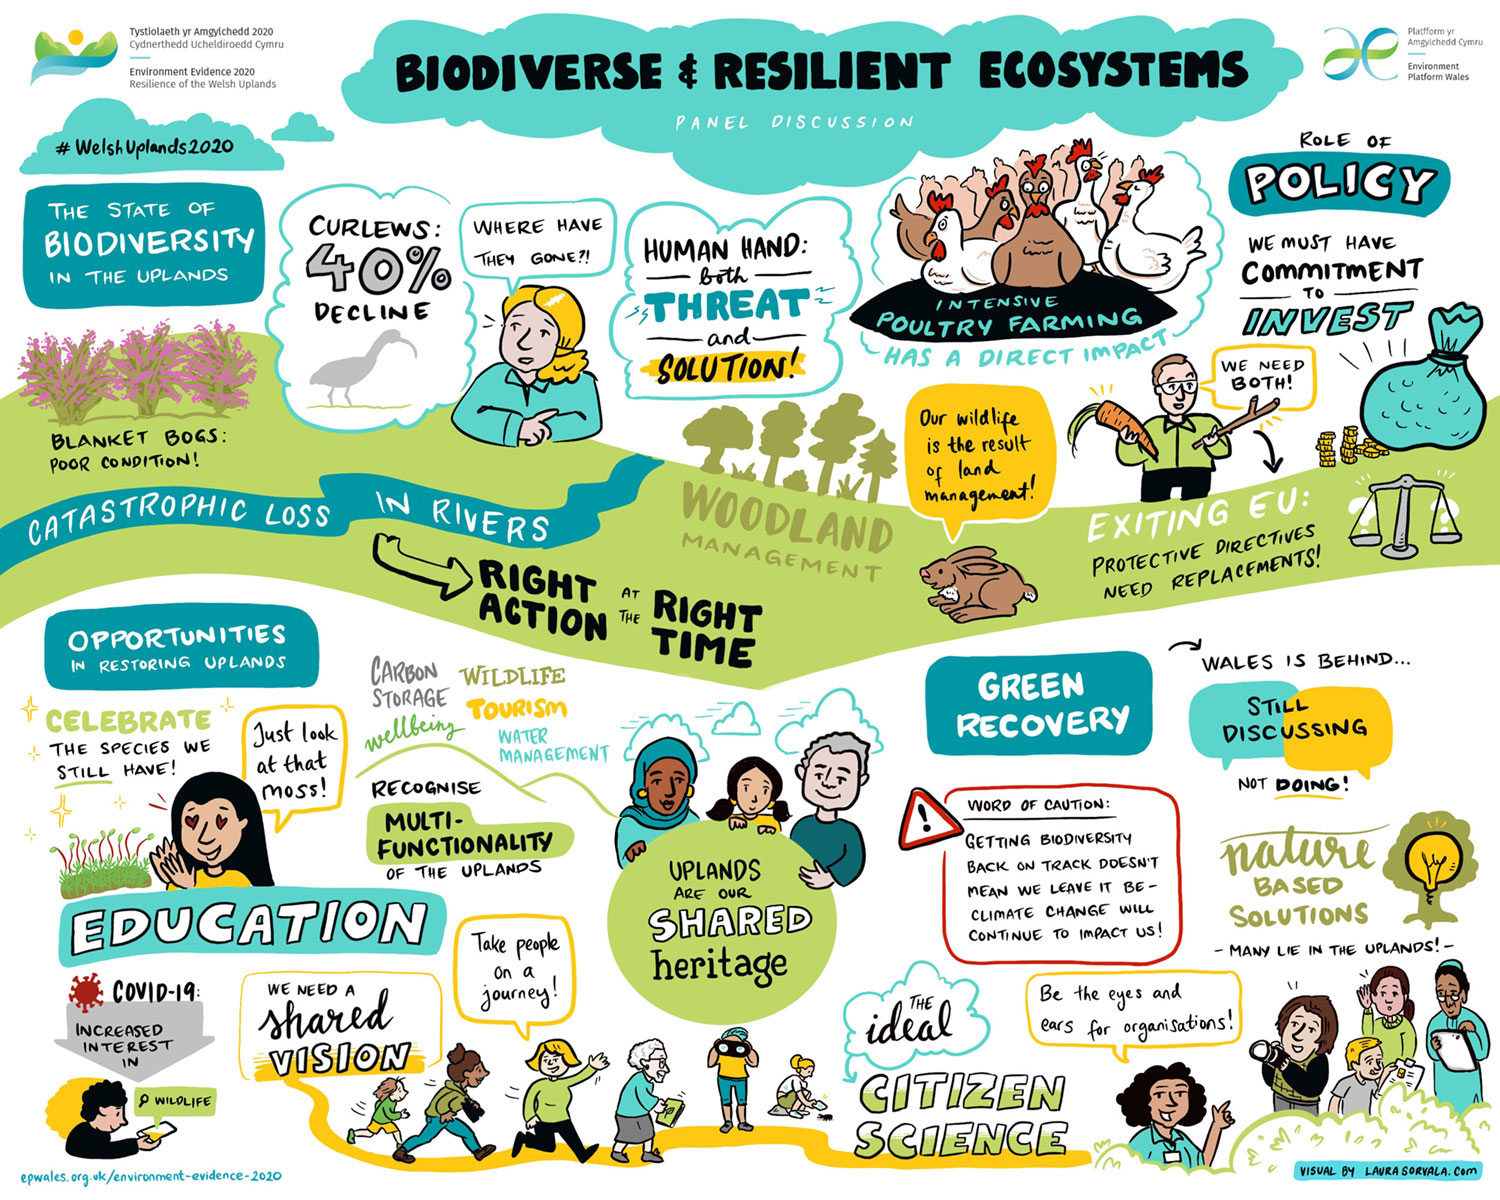 An illustration of a conference discussion on  biodiverse and resilient ecosystems.